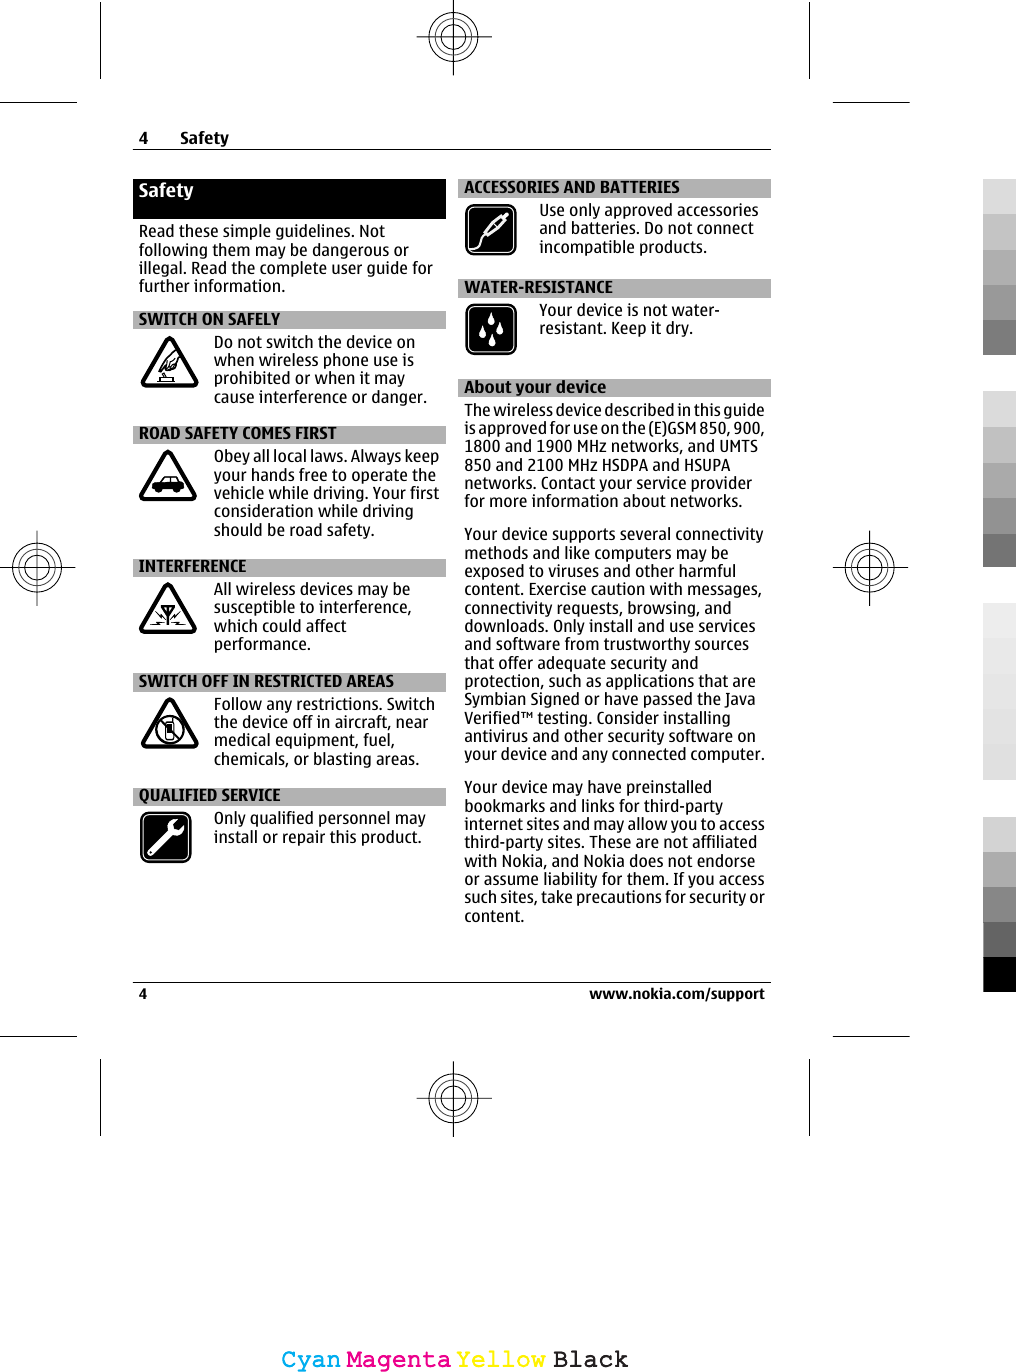 SafetyRead these simple guidelines. Notfollowing them may be dangerous orillegal. Read the complete user guide forfurther information.SWITCH ON SAFELYDo not switch the device onwhen wireless phone use isprohibited or when it maycause interference or danger.ROAD SAFETY COMES FIRSTObey all local laws. Always keepyour hands free to operate thevehicle while driving. Your firstconsideration while drivingshould be road safety.INTERFERENCEAll wireless devices may besusceptible to interference,which could affectperformance.SWITCH OFF IN RESTRICTED AREASFollow any restrictions. Switchthe device off in aircraft, nearmedical equipment, fuel,chemicals, or blasting areas.QUALIFIED SERVICEOnly qualified personnel mayinstall or repair this product.ACCESSORIES AND BATTERIESUse only approved accessoriesand batteries. Do not connectincompatible products.WATER-RESISTANCEYour device is not water-resistant. Keep it dry.About your deviceThe wireless device described in this guideis approved for use on the (E)GSM 850, 900,1800 and 1900 MHz networks, and UMTS850 and 2100 MHz HSDPA and HSUPAnetworks. Contact your service providerfor more information about networks.Your device supports several connectivitymethods and like computers may beexposed to viruses and other harmfulcontent. Exercise caution with messages,connectivity requests, browsing, anddownloads. Only install and use servicesand software from trustworthy sourcesthat offer adequate security andprotection, such as applications that areSymbian Signed or have passed the JavaVerified™ testing. Consider installingantivirus and other security software onyour device and any connected computer.Your device may have preinstalledbookmarks and links for third-partyinternet sites and may allow you to accessthird-party sites. These are not affiliatedwith Nokia, and Nokia does not endorseor assume liability for them. If you accesssuch sites, take precautions for security orcontent.4Safety4 www.nokia.com/supportCyanCyanMagentaMagentaYellowYellowBlackBlack